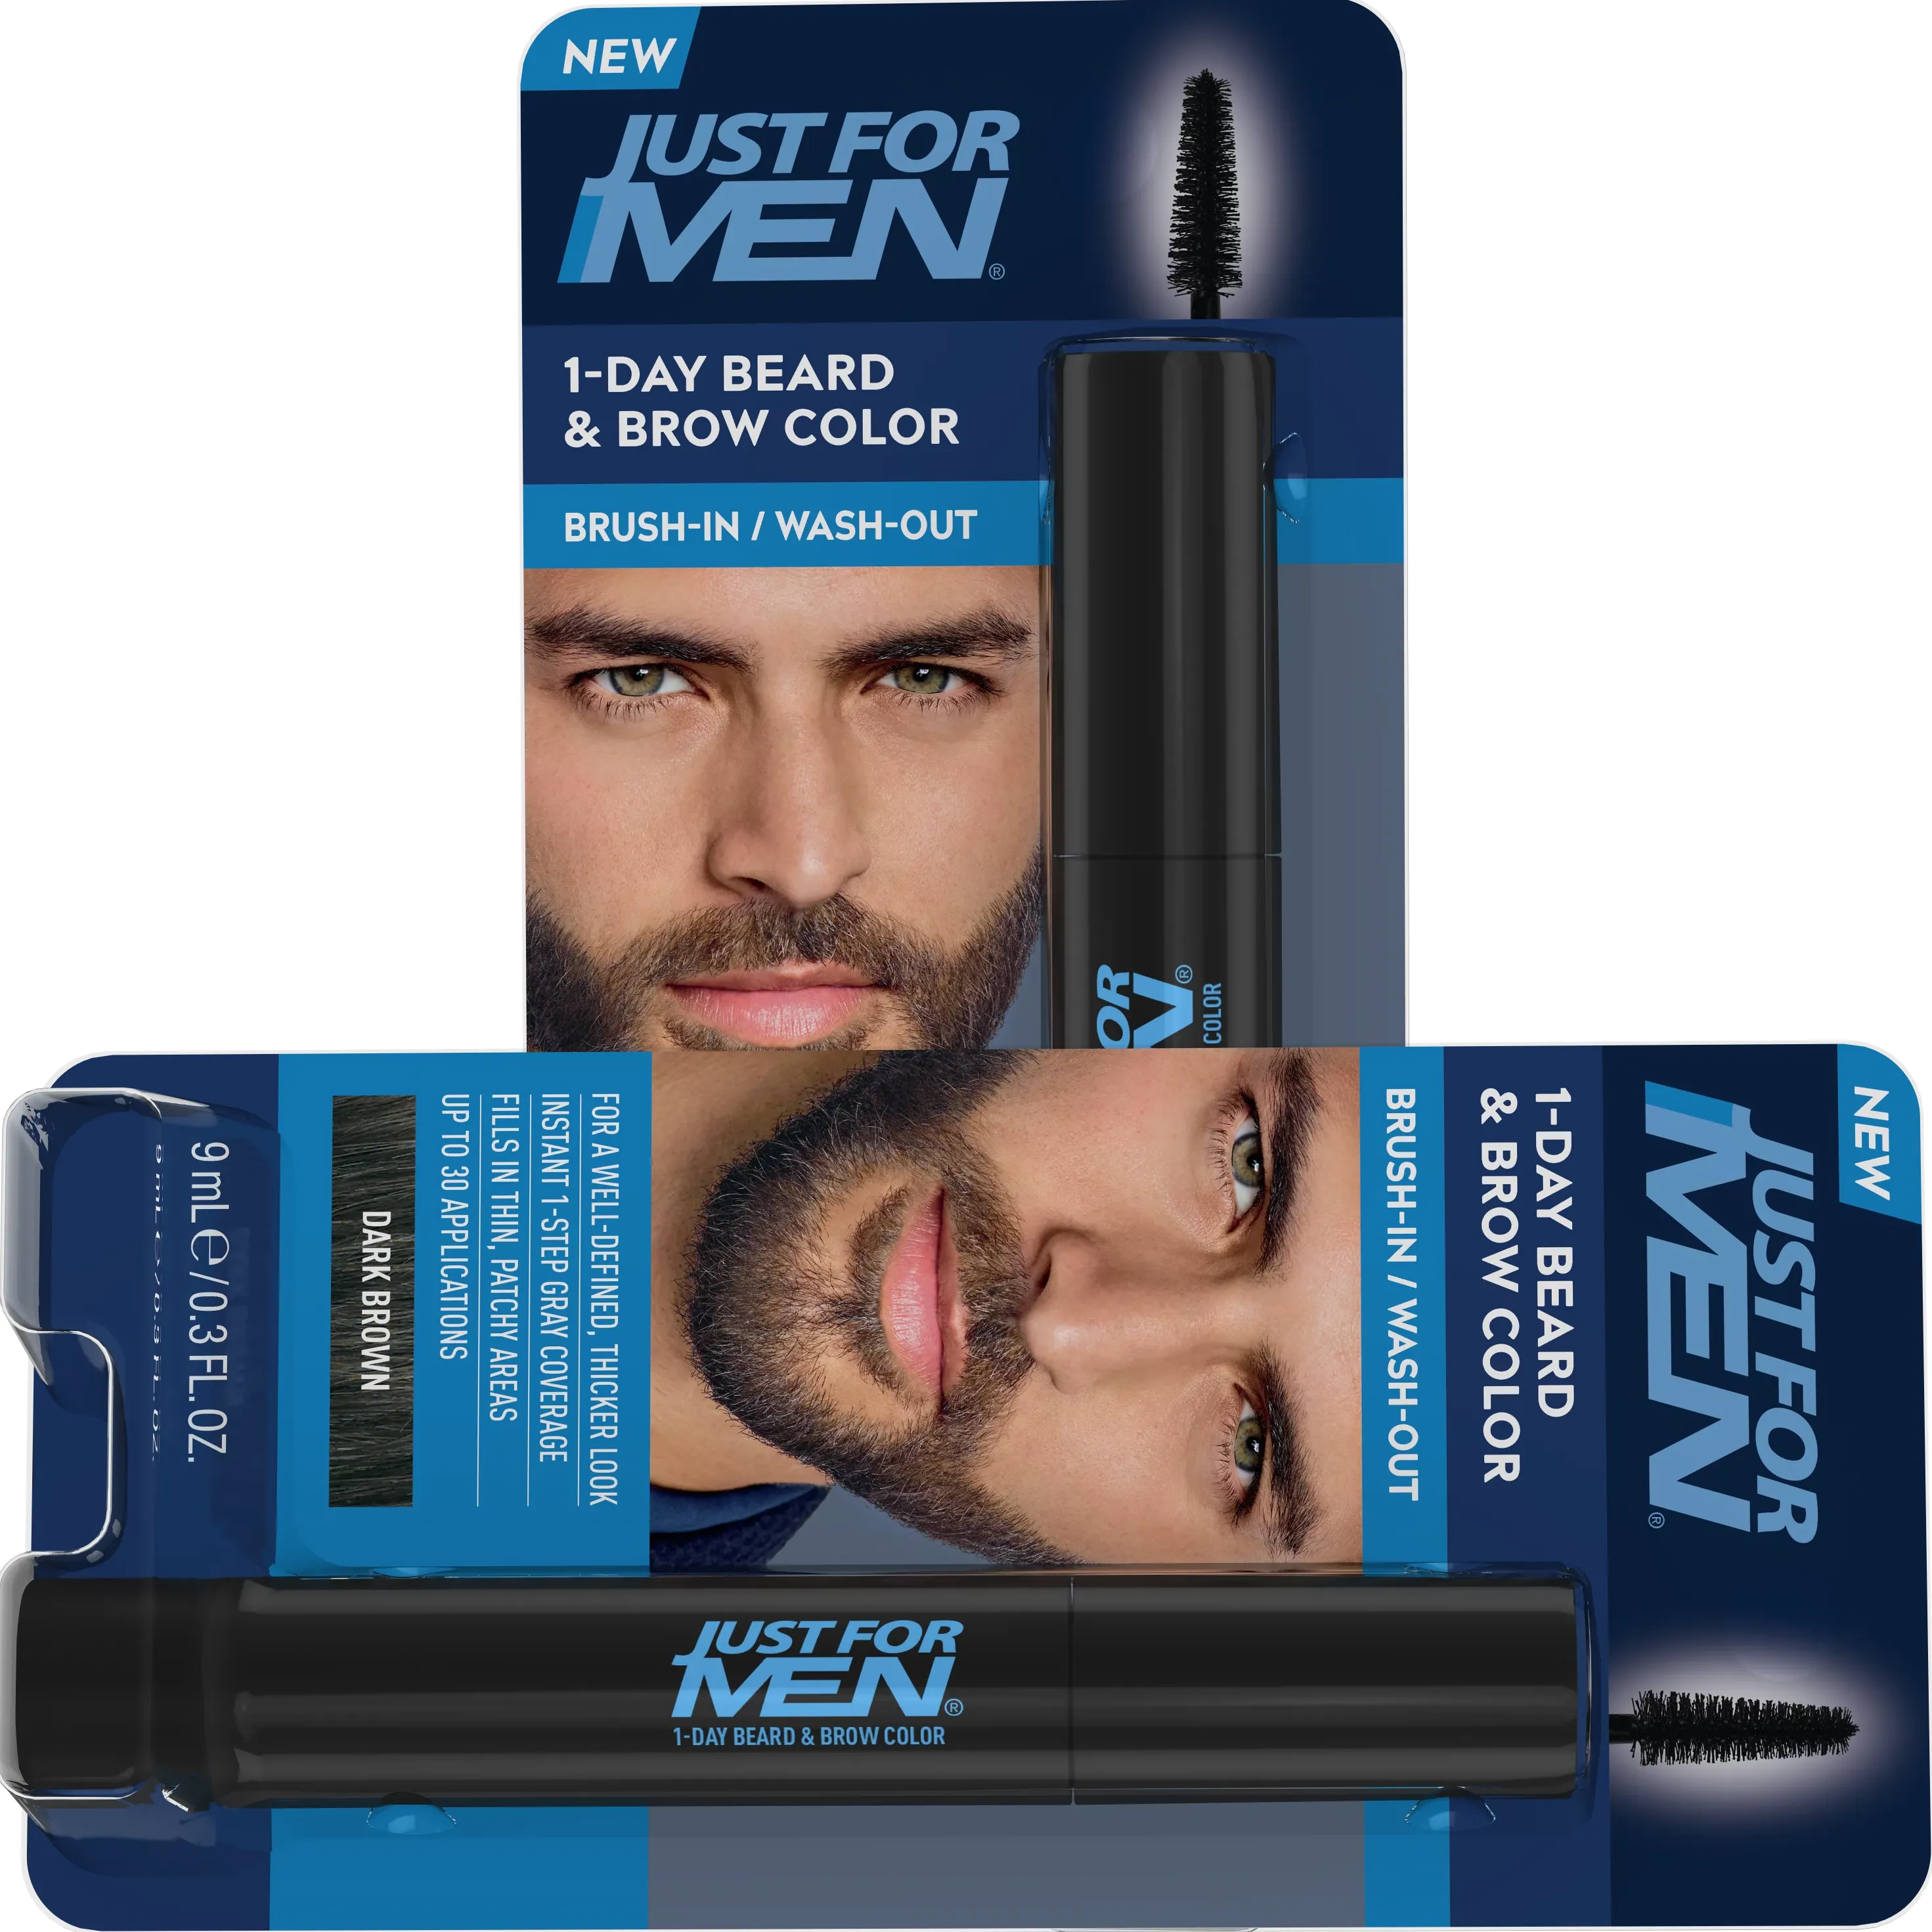 Free 1-Day Beard & Brow Color By Just For Men